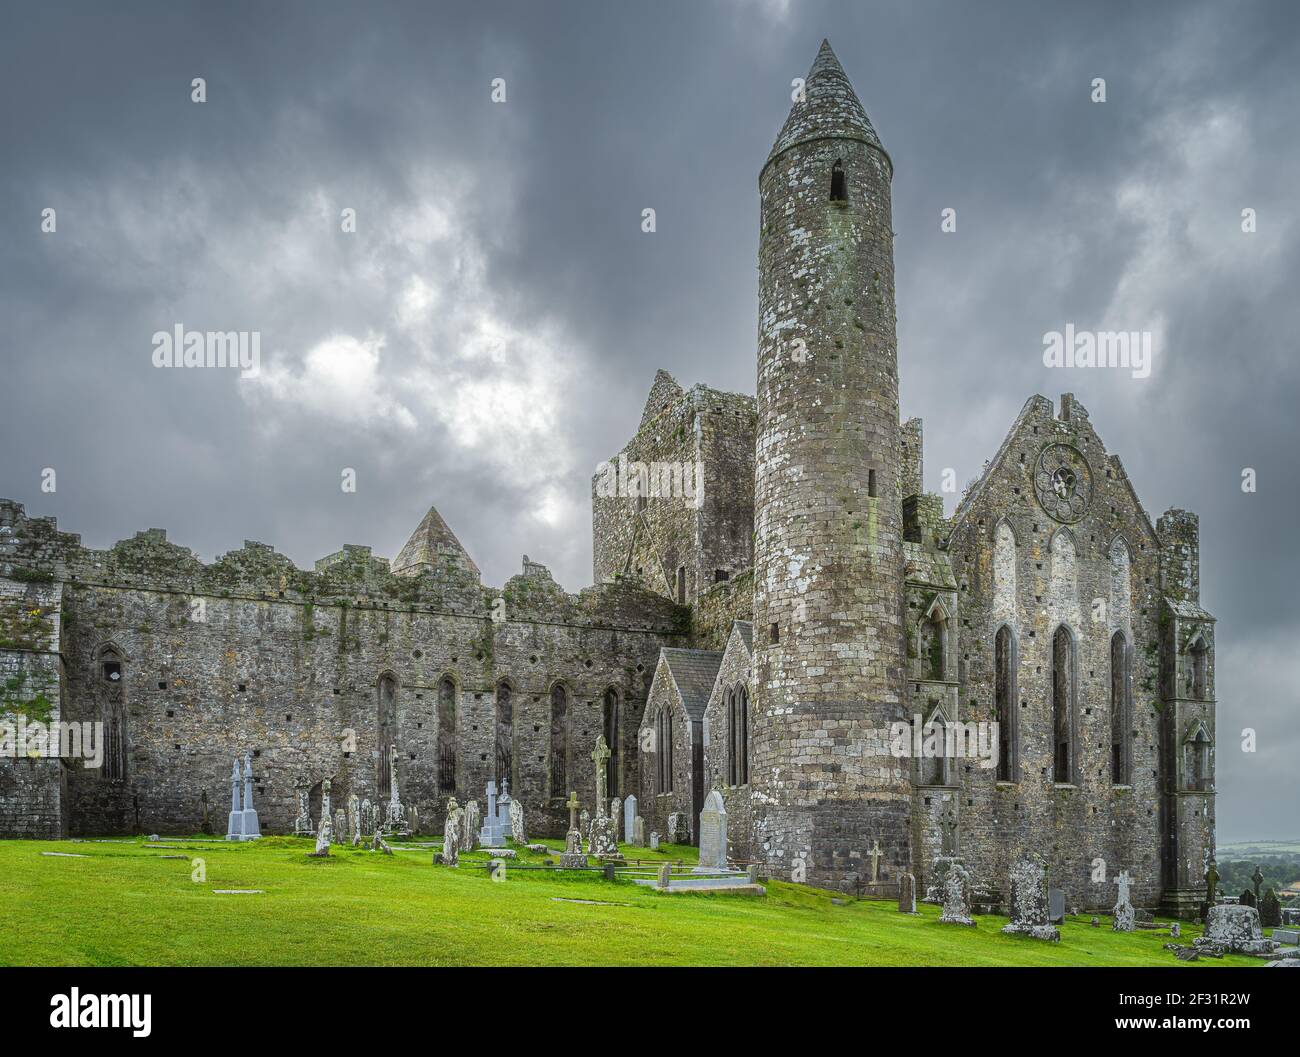 Graveyard with Celtic crosses and tombstones in front of majestic Rock of Cashel castle, County Tipperary, Ireland Stock Photo